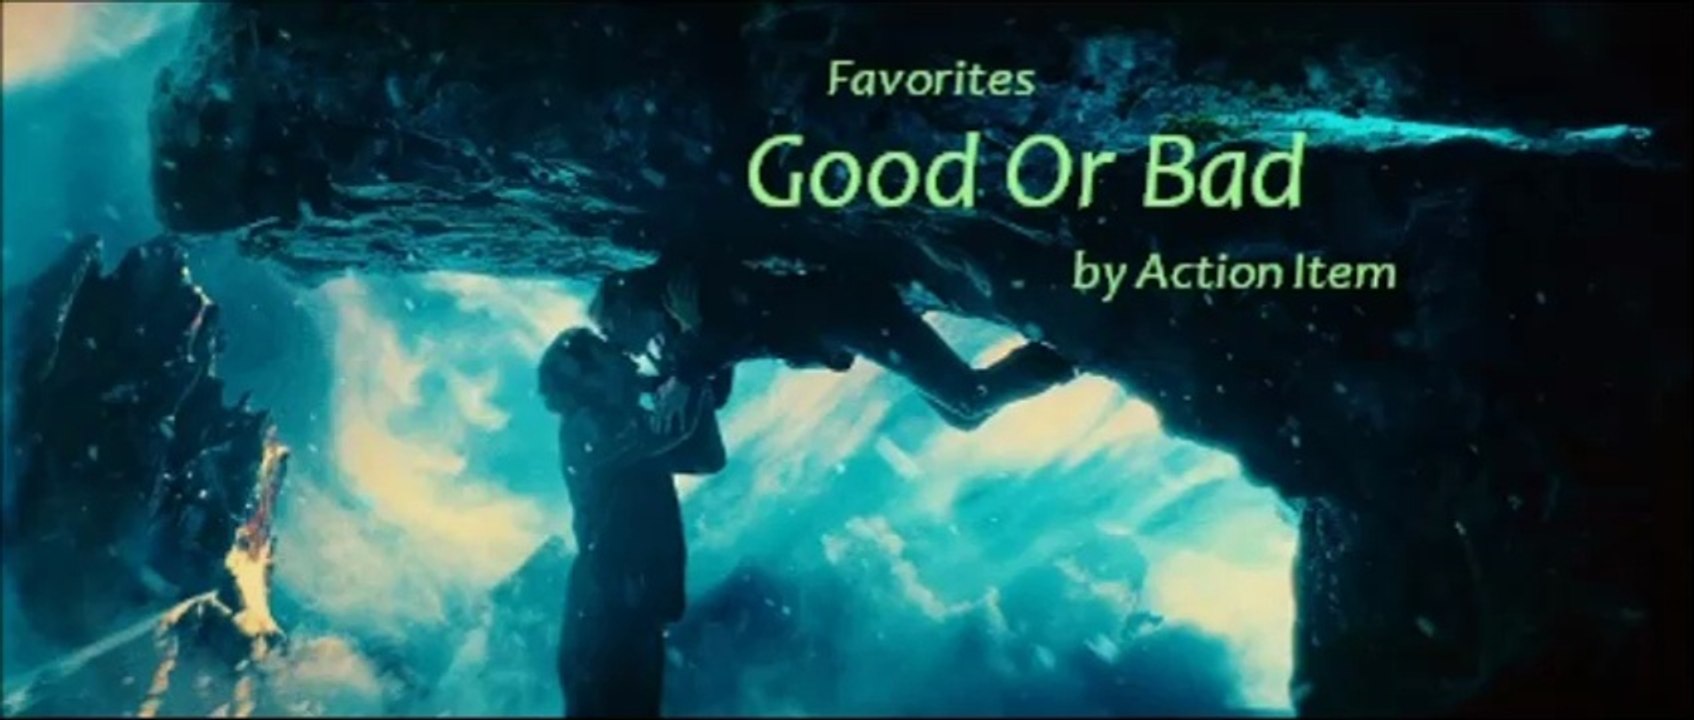 Good Or Bad by Action Item (Favorites)